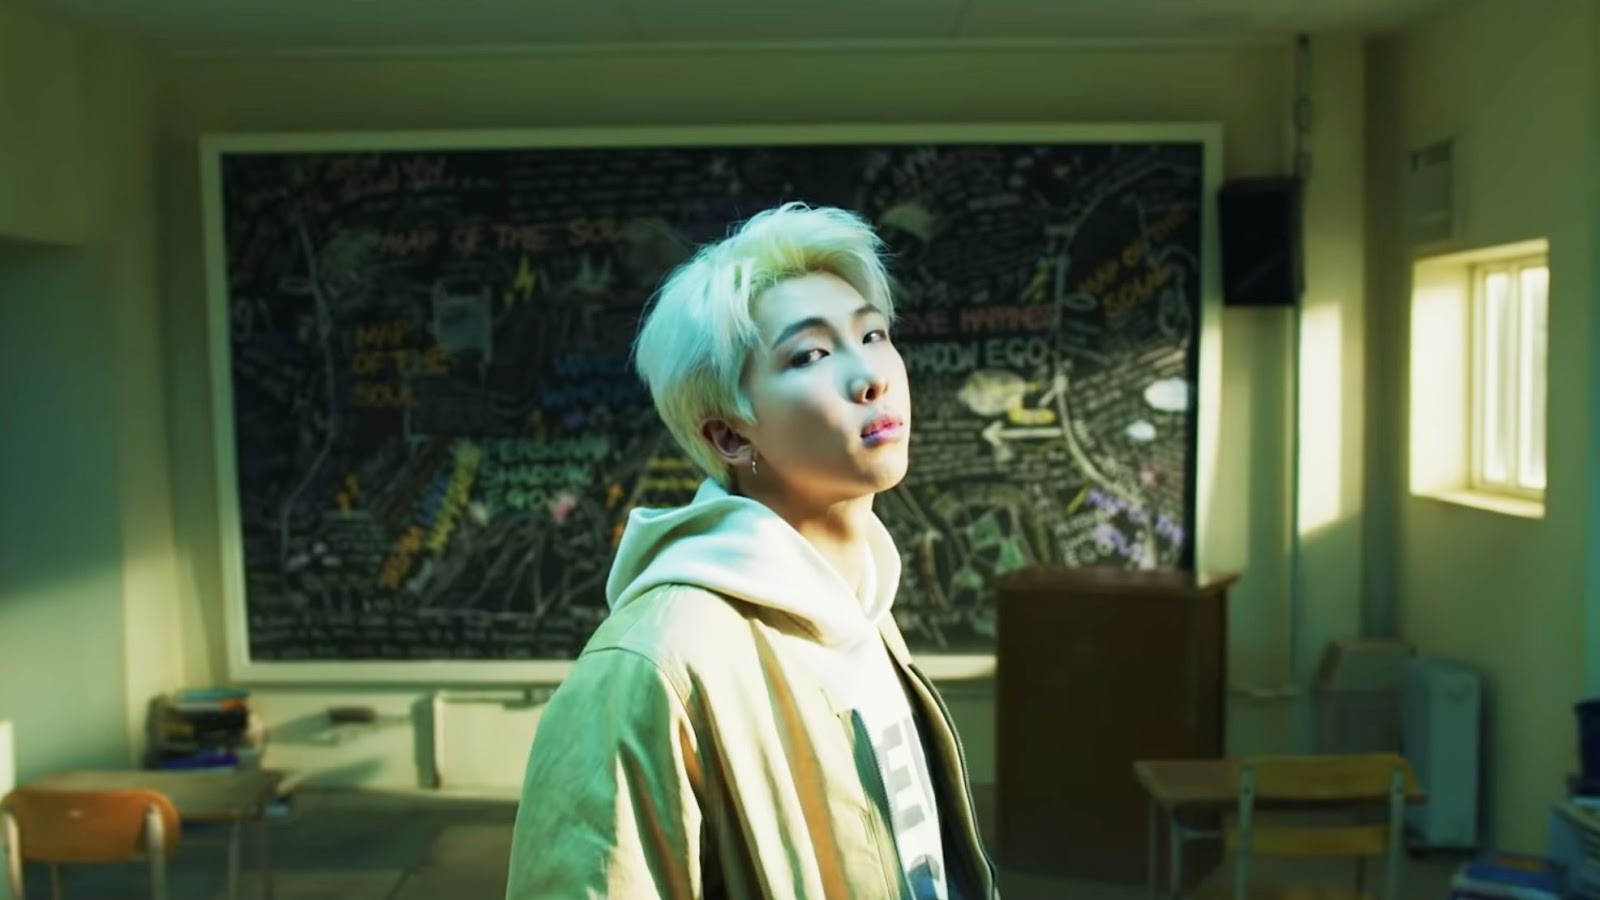 Everything You Need To Know About The Door In BTS’s “SHADOW” Comeback Trailer